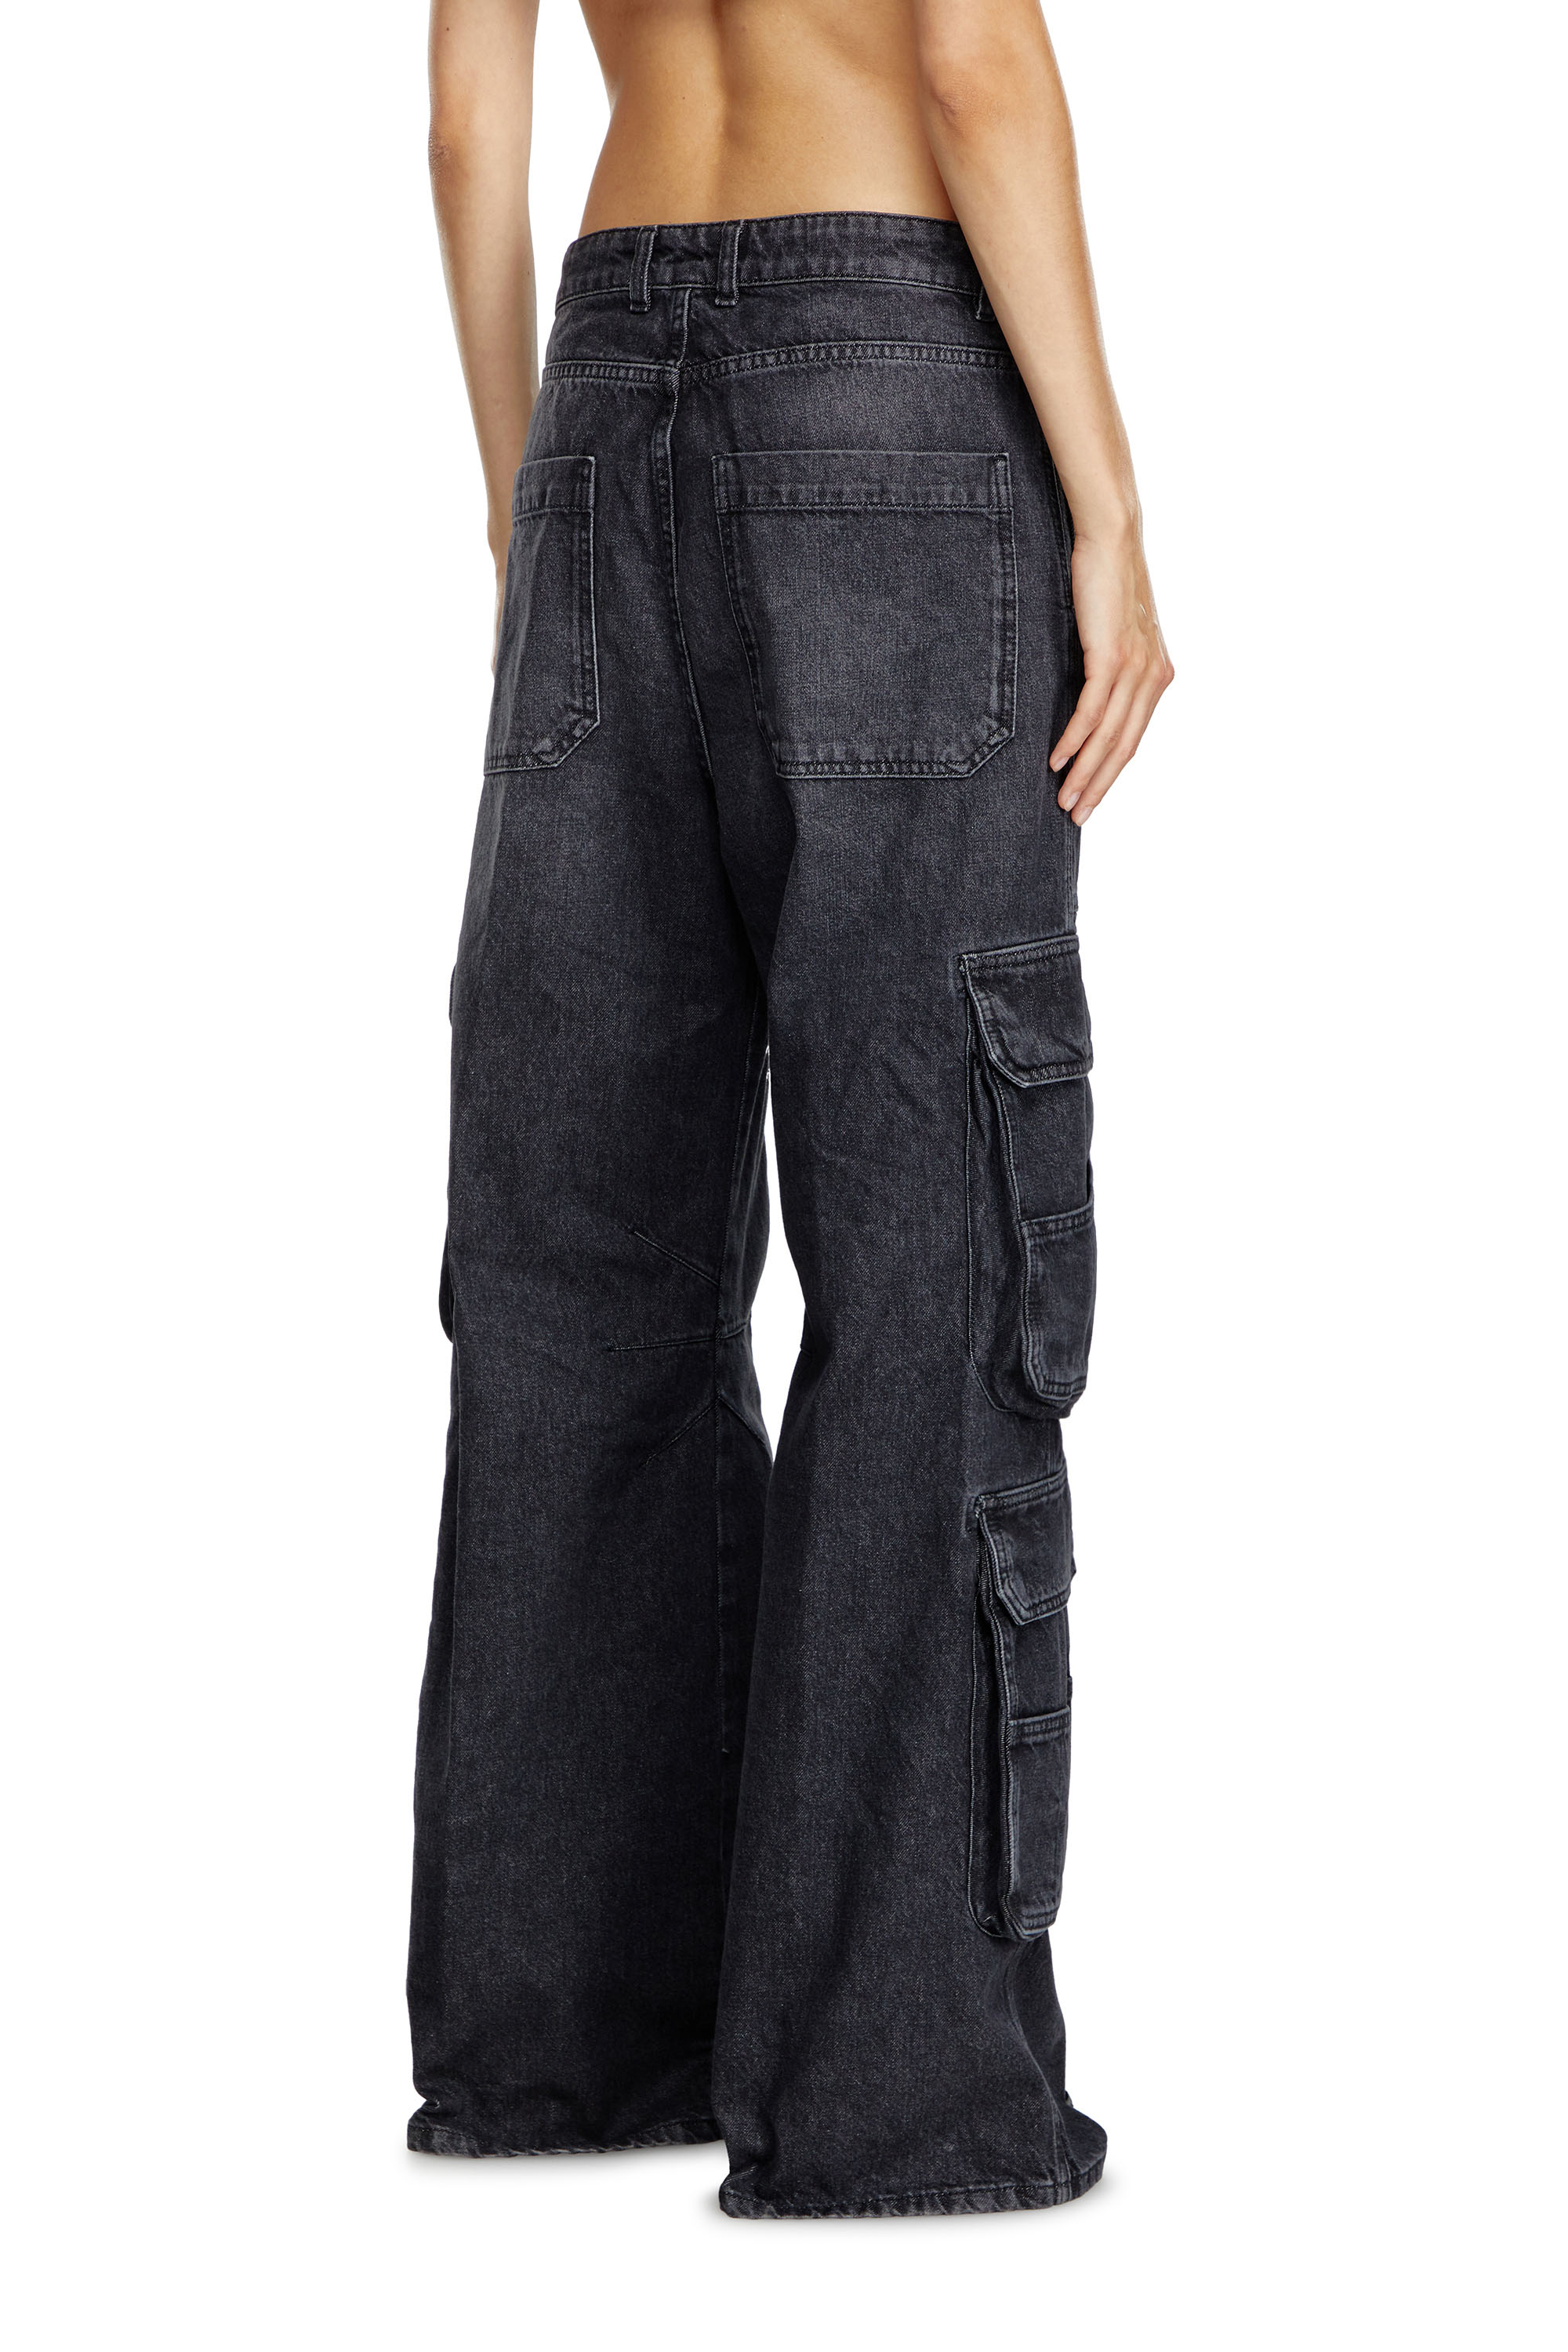 Diesel - Straight Jeans 1996 D-Sire 0HLAA, Mujer Straight Jeans - 1996 D-Sire in Negro - Image 3